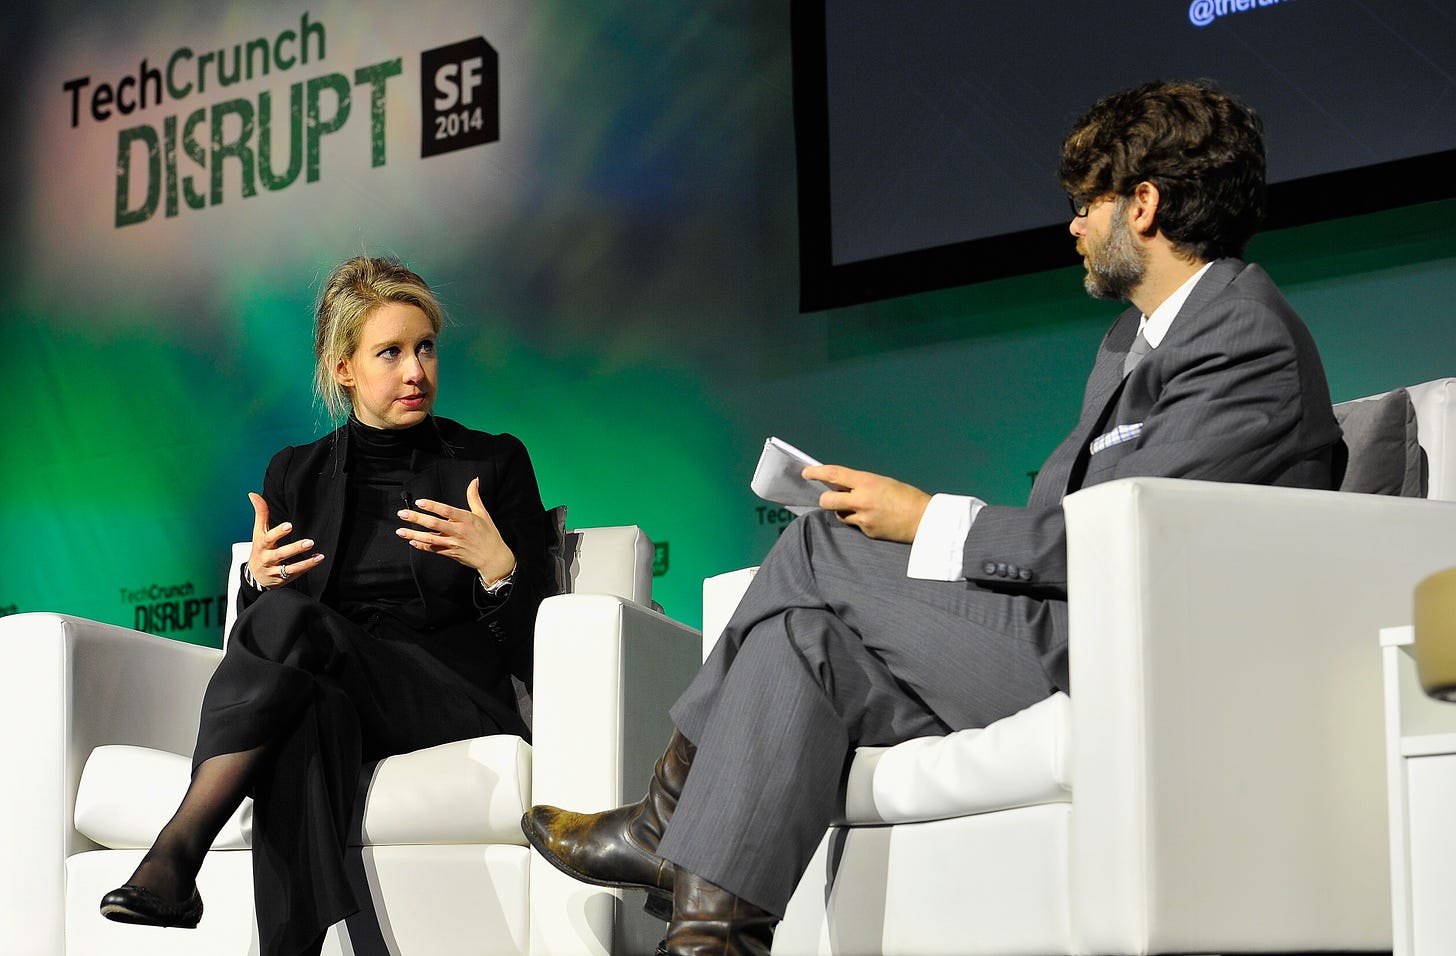 File:Theranos Chairman, CEO and Founder Elizabeth Holmes (L) and TechCrunch  Writer and Moderator Jonathan Shieber speak onstage at TechCrunch Disrupt  at Pier 48 on September 8, 2014 (14995888227).jpg - Wikimedia Commons